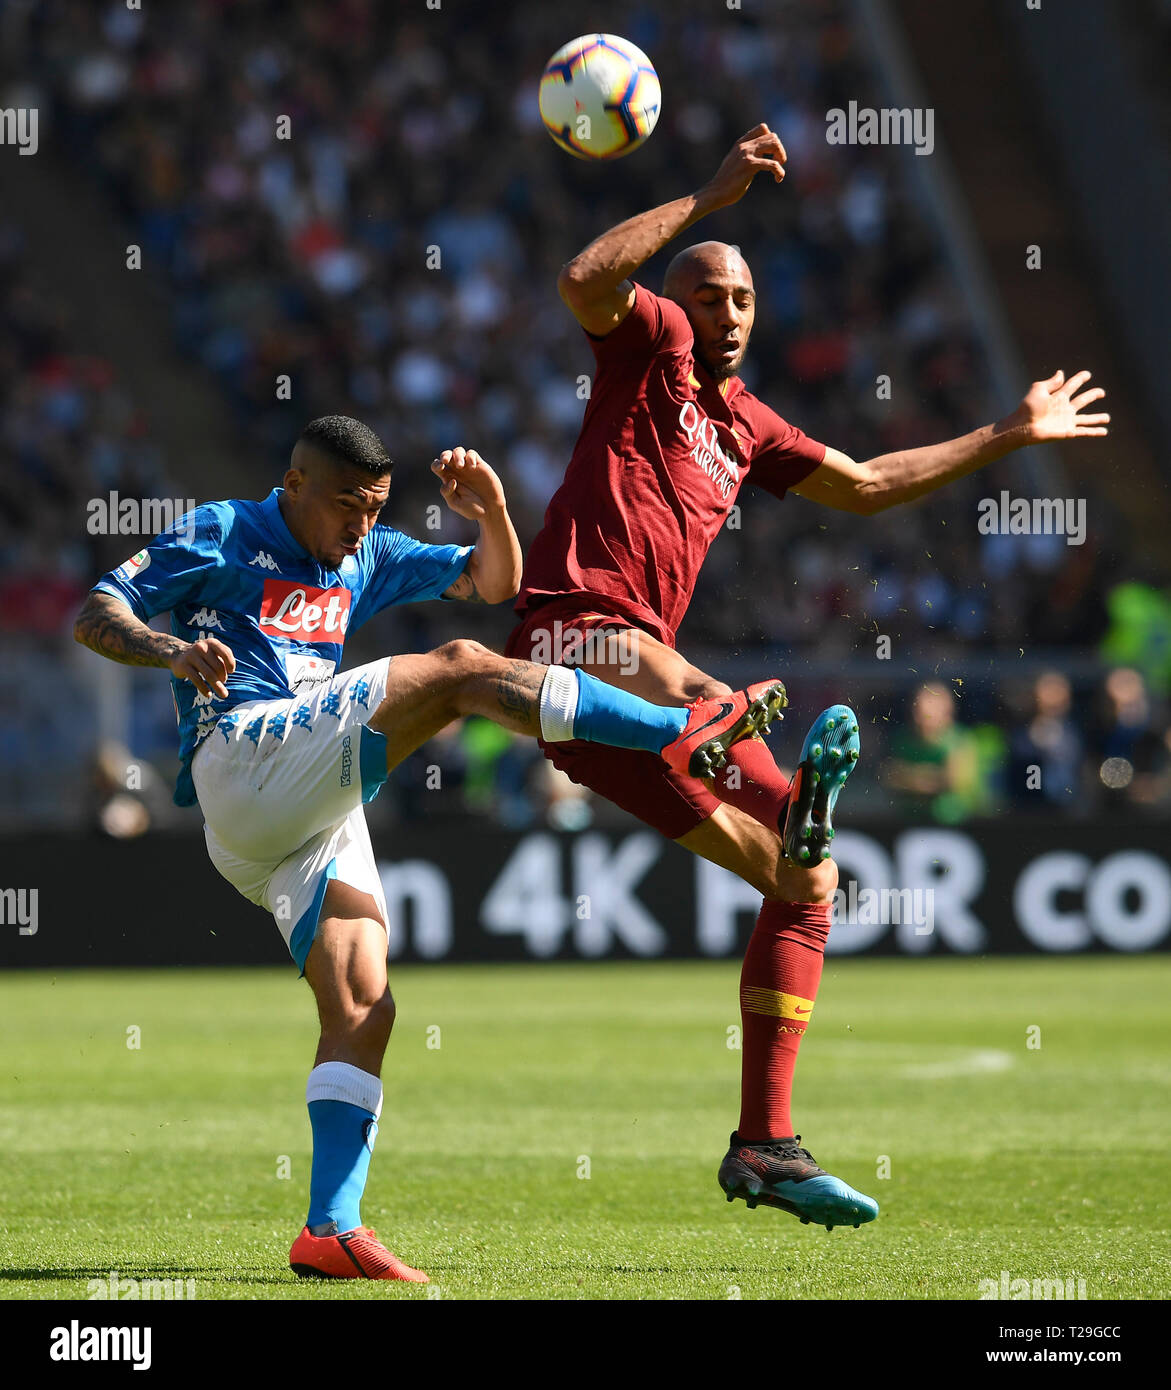 Rome, Italy. 31st Mar, 2019. Napoli's Allan (L) vies with Roma's Steven Nzonzi during a Serie A soccer match in Rome, Italy, March 31, 2019. Napoli won 4-1. Credit: Alberto Lingria/Xinhua/Alamy Live News Stock Photo